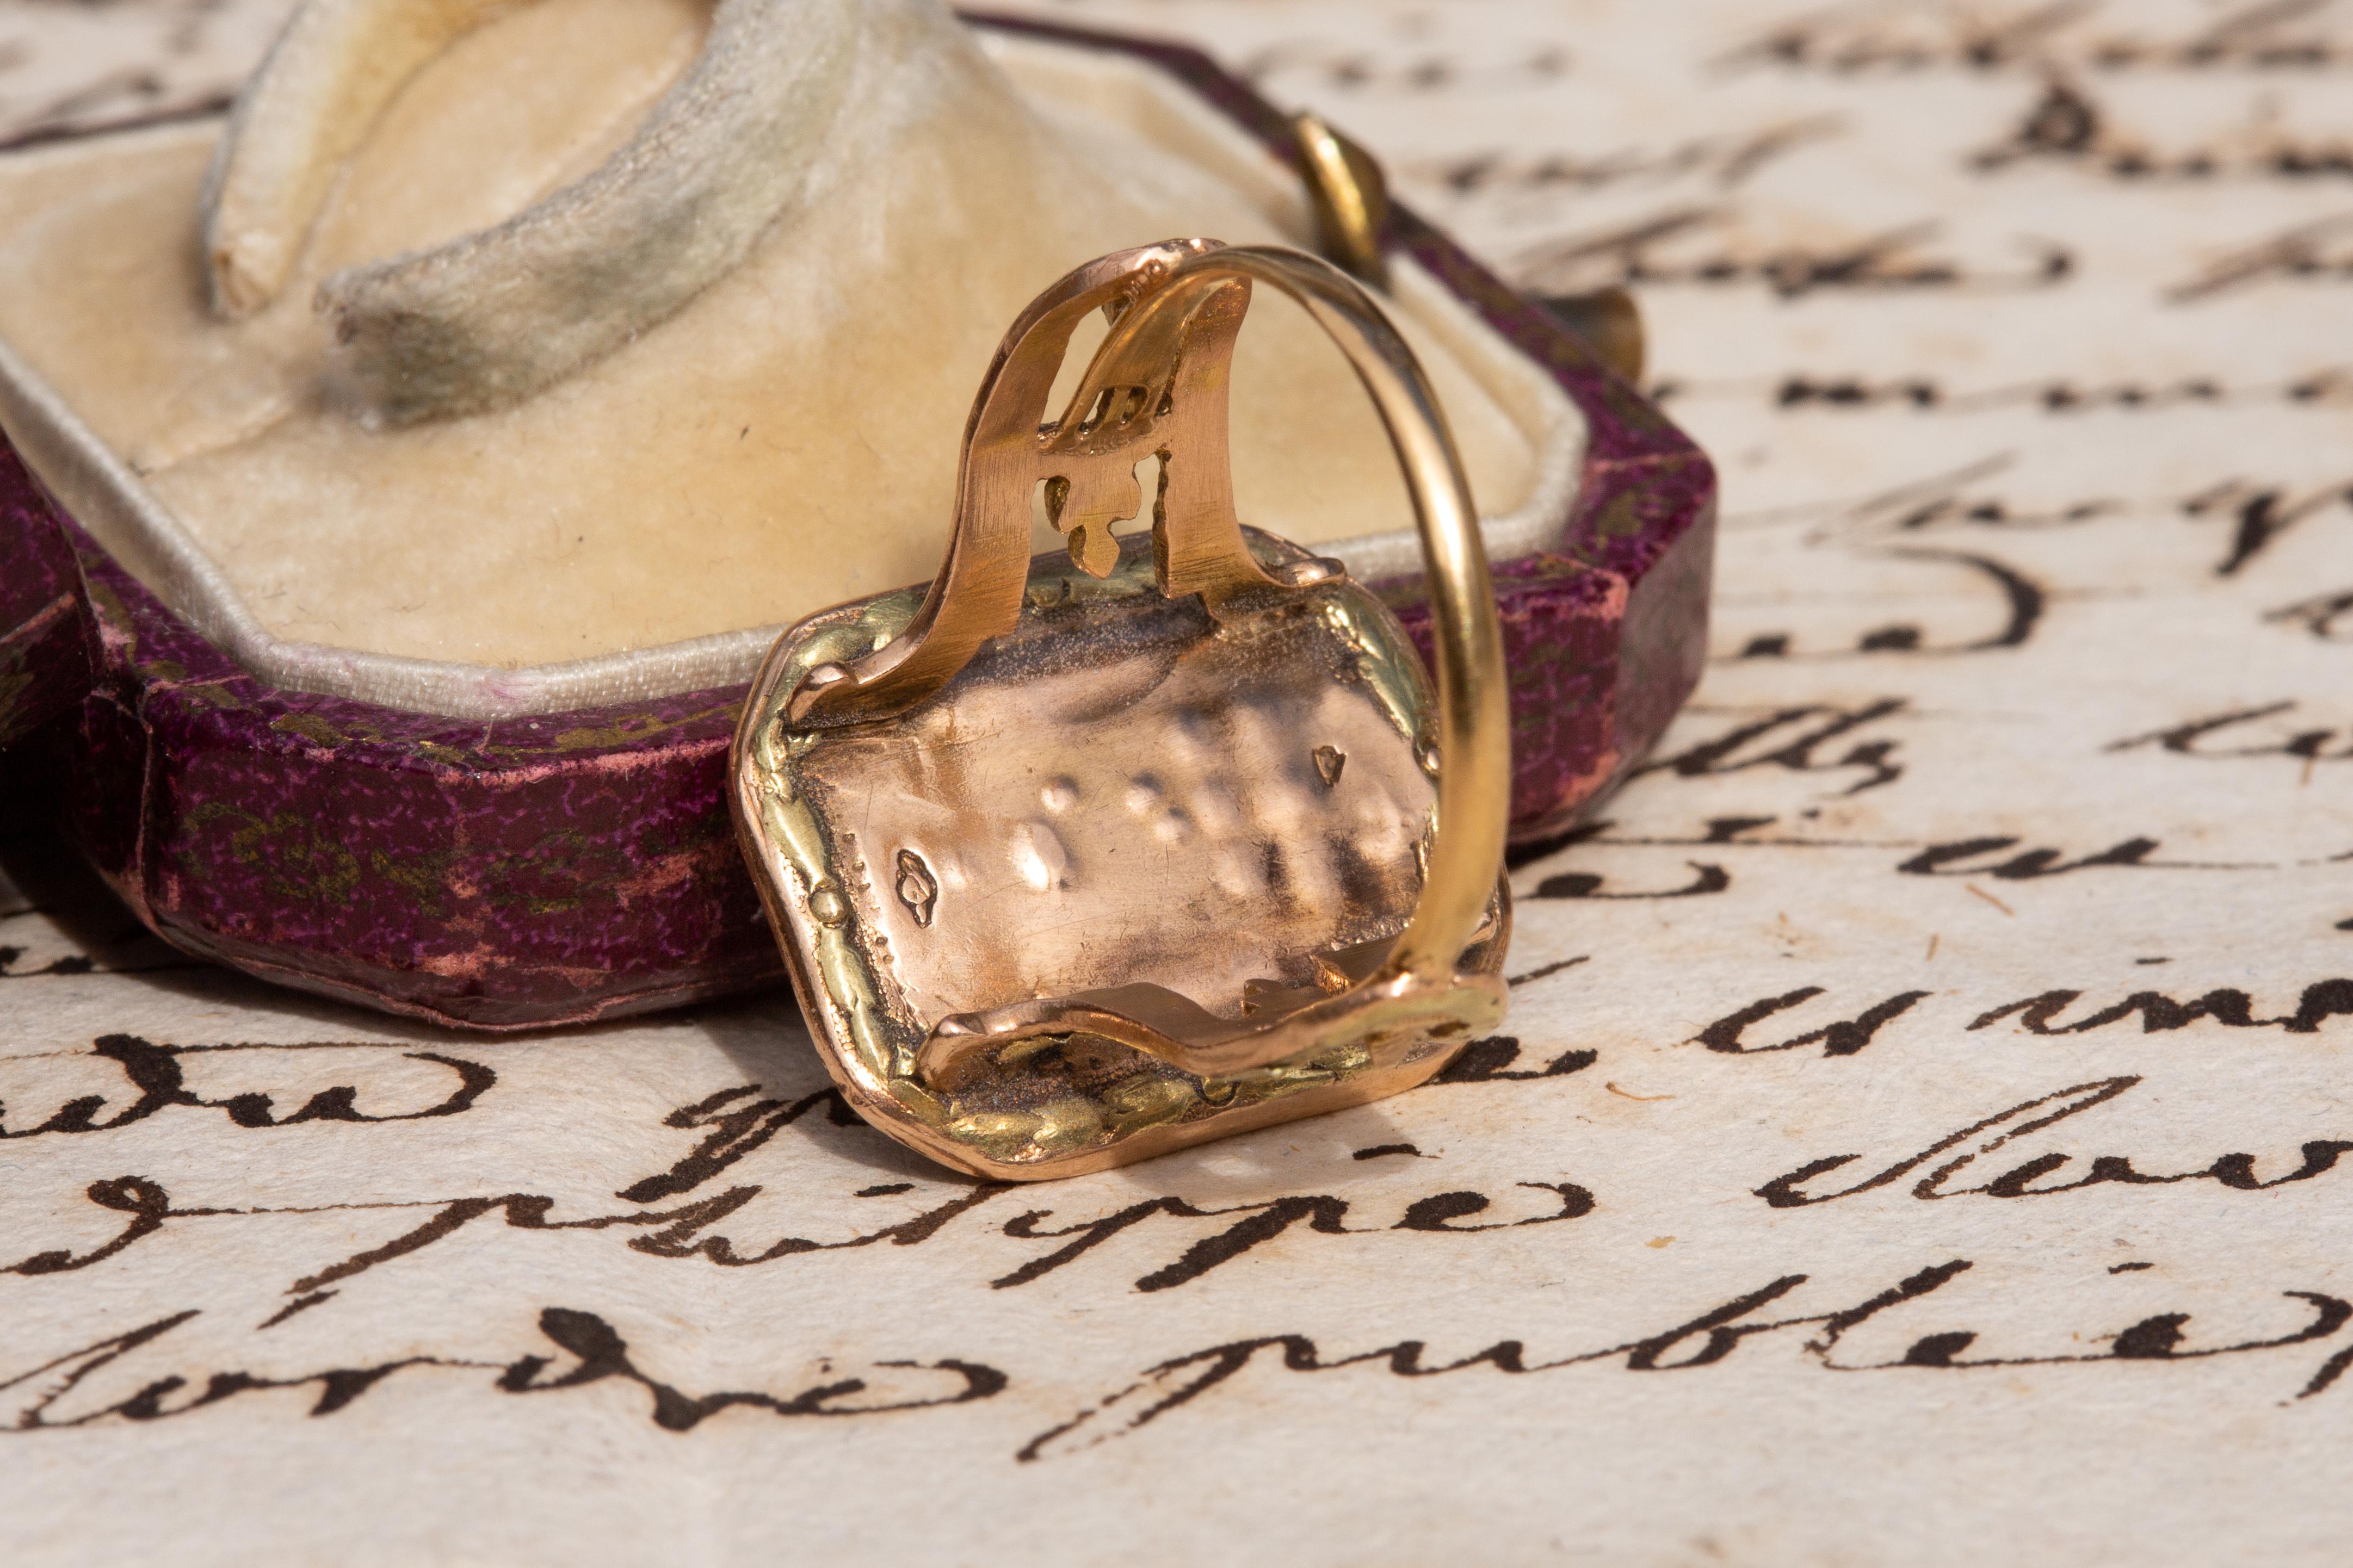 Women's or Men's Superb 18th Century French Antique Gold Monogrammed Intaglio Seal Ring Georgian